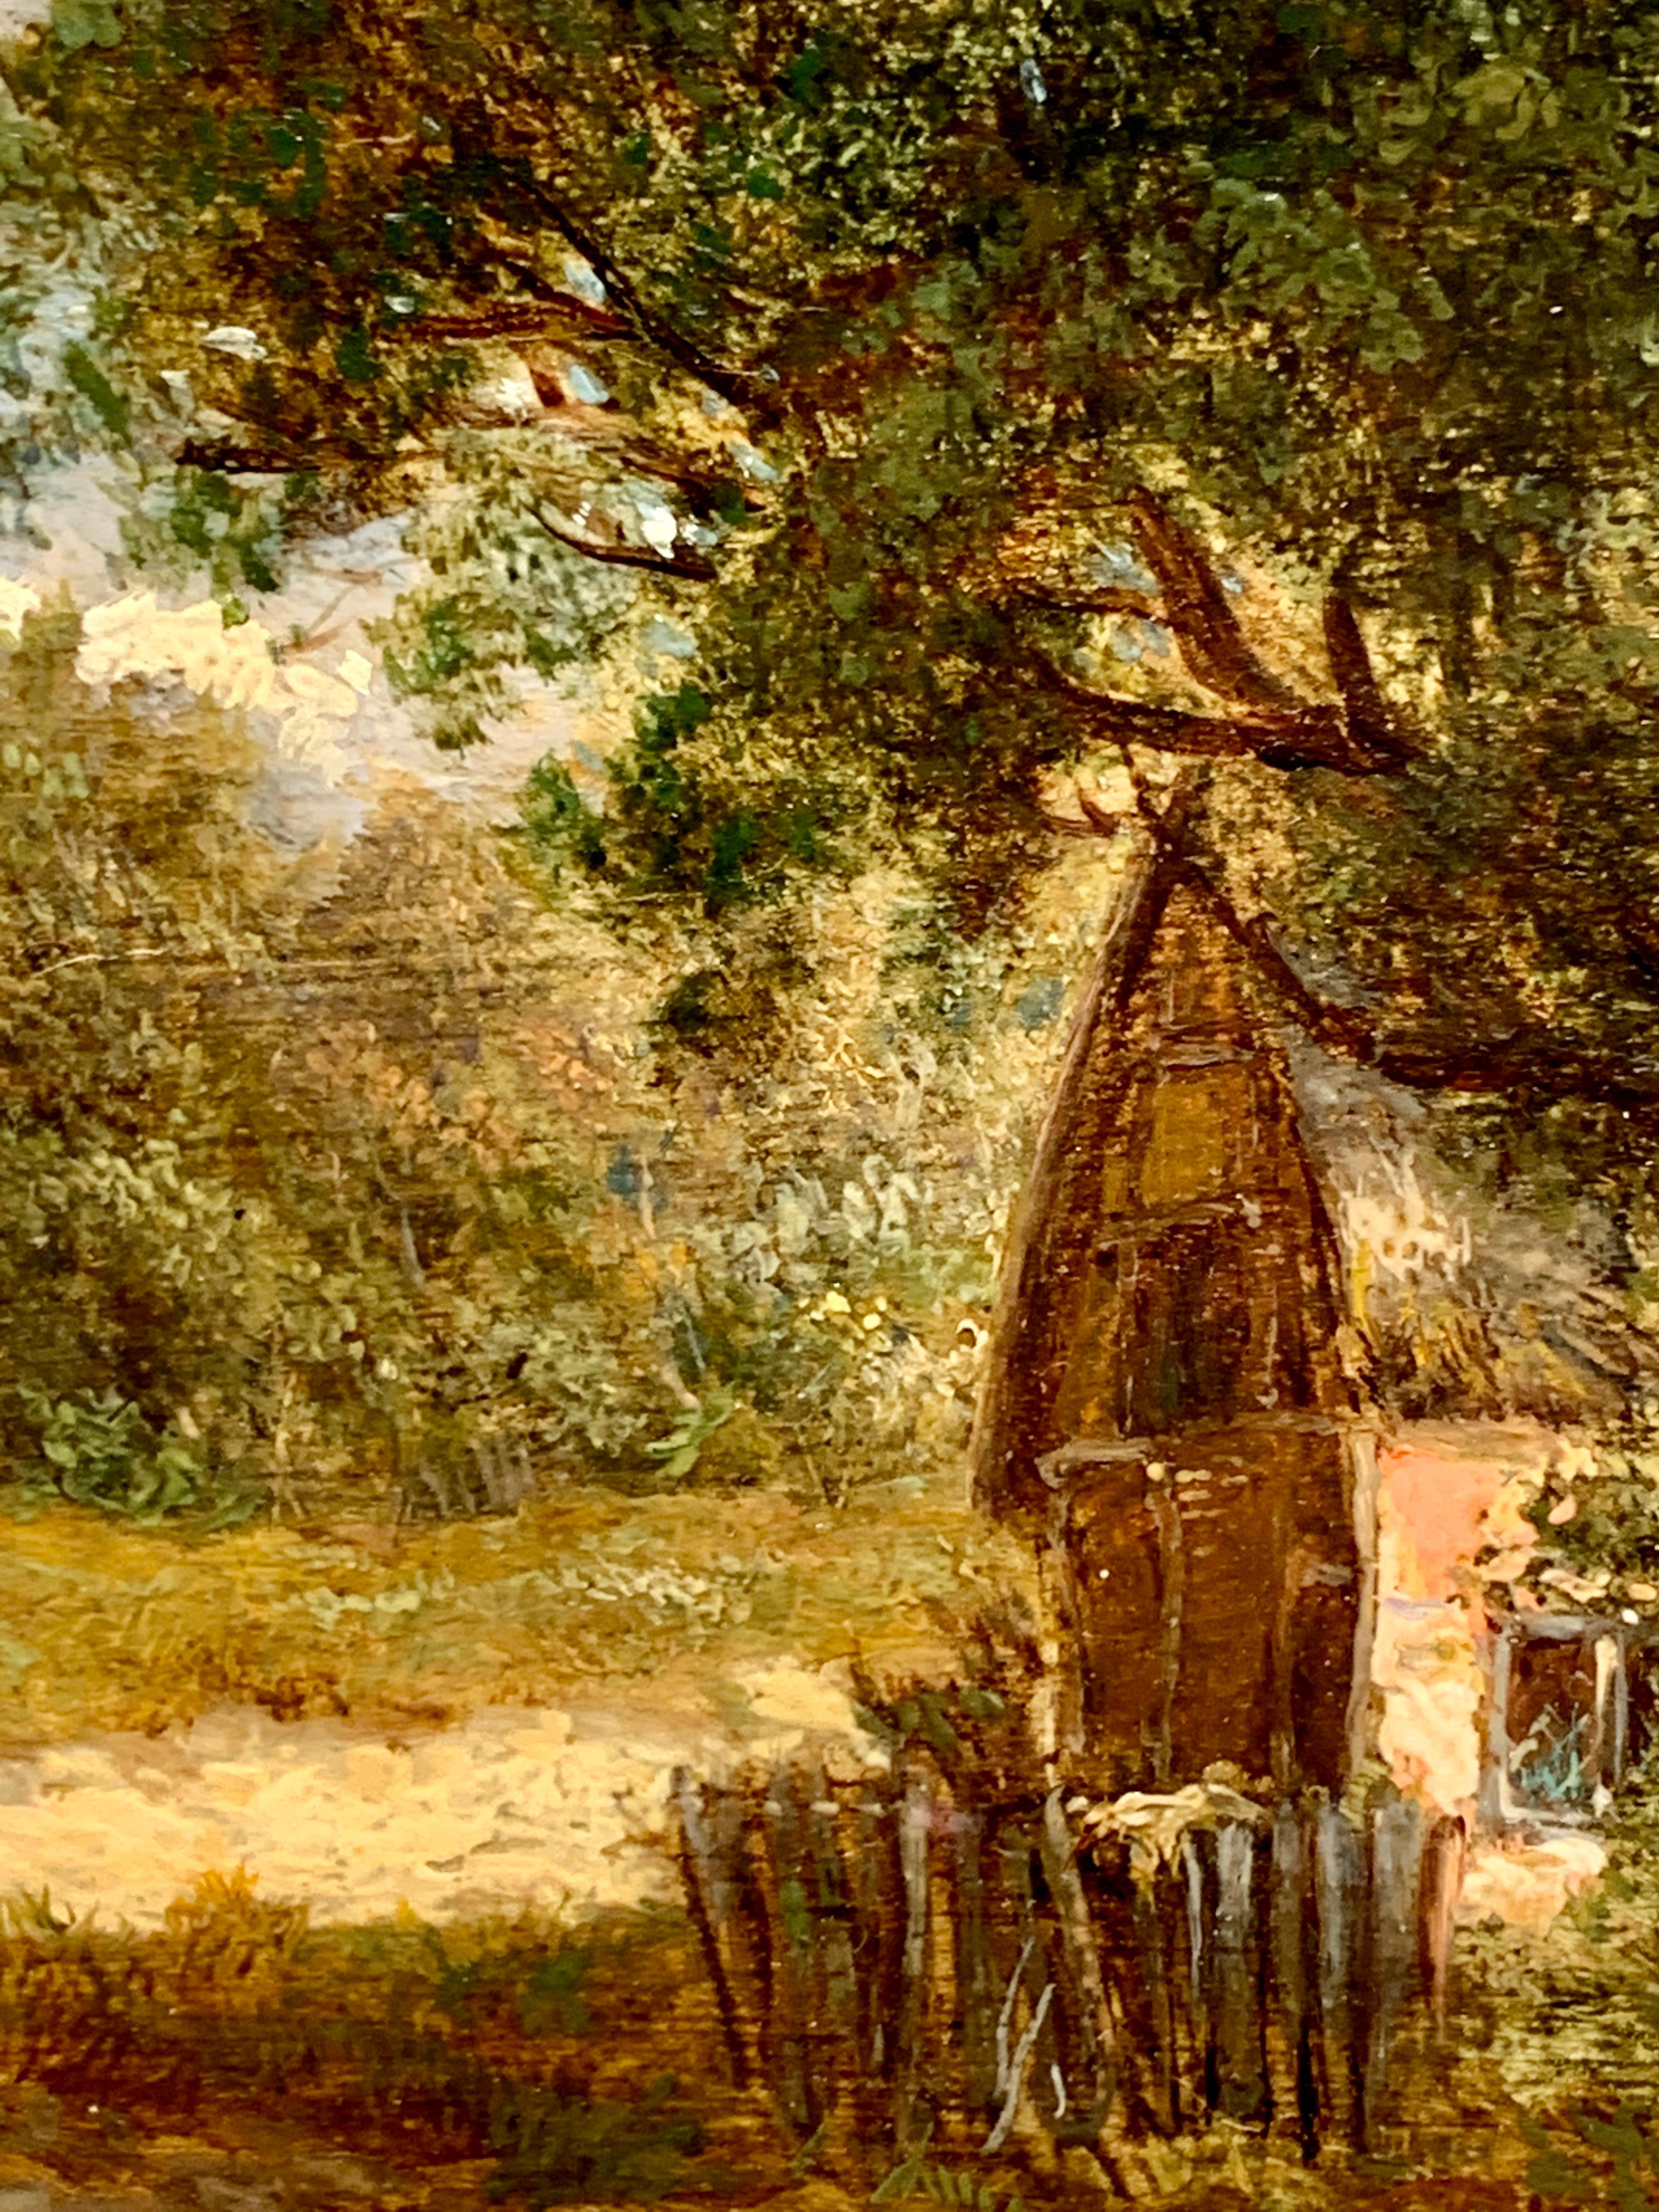 Joseph Thors was a landscape painter who lived in London but also painted in the Midlands, where he is regarded as a member of the Birmingham School. His landscapes are mainly rustic cottages, figures and animals, painted in a style similar to that